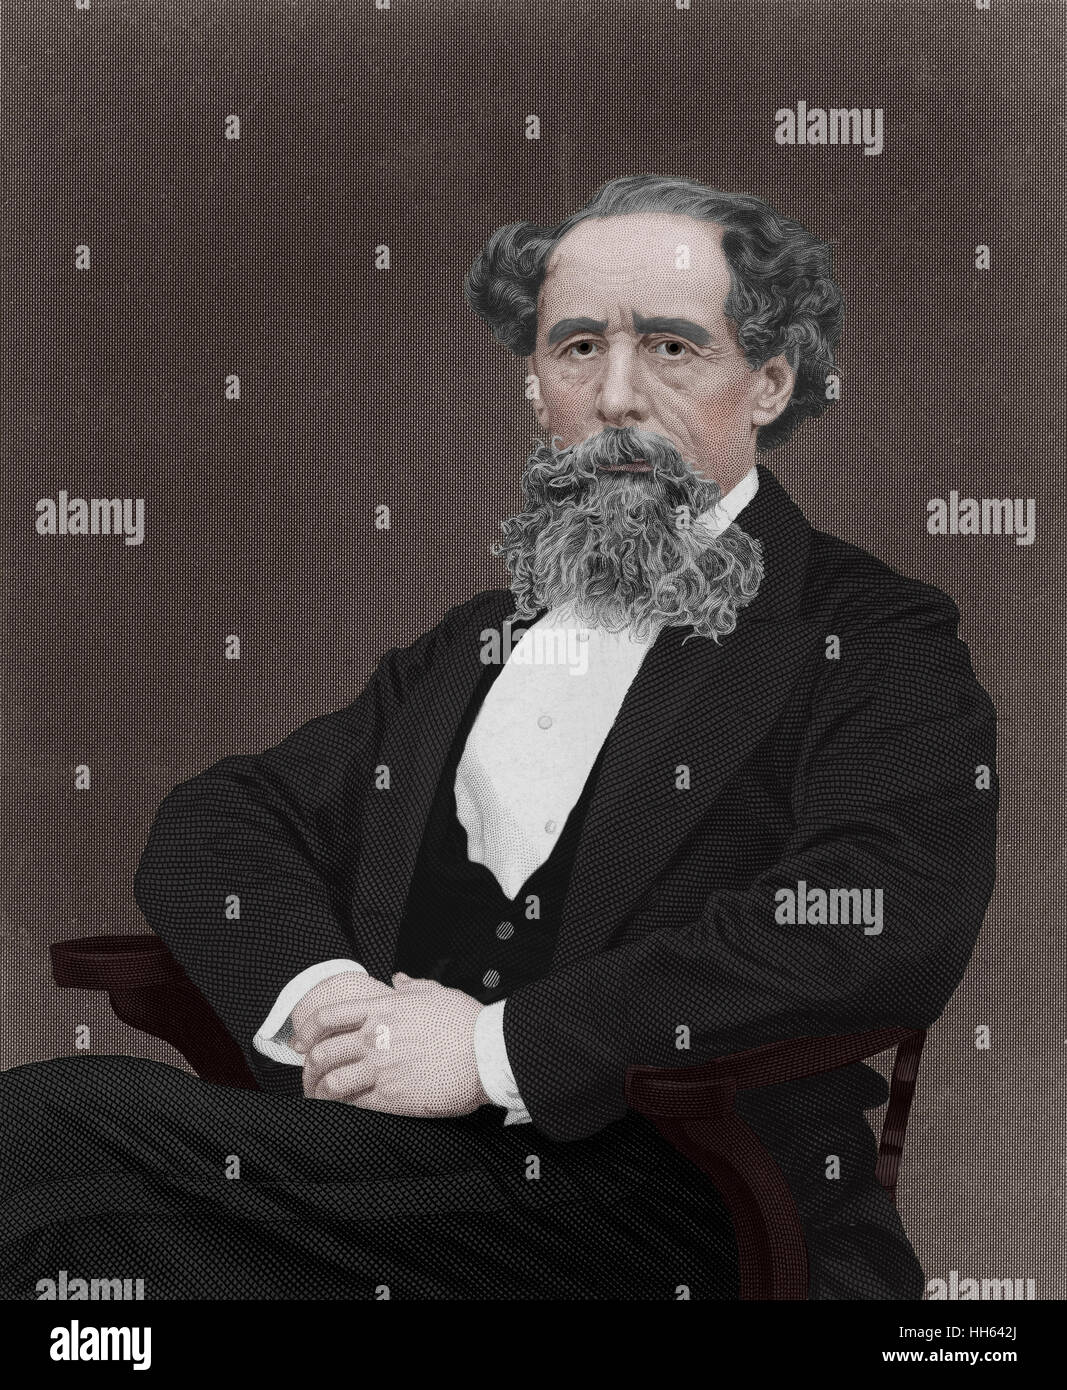 Charles Dickens (1812-1870) - scrittore inglese. Foto Stock